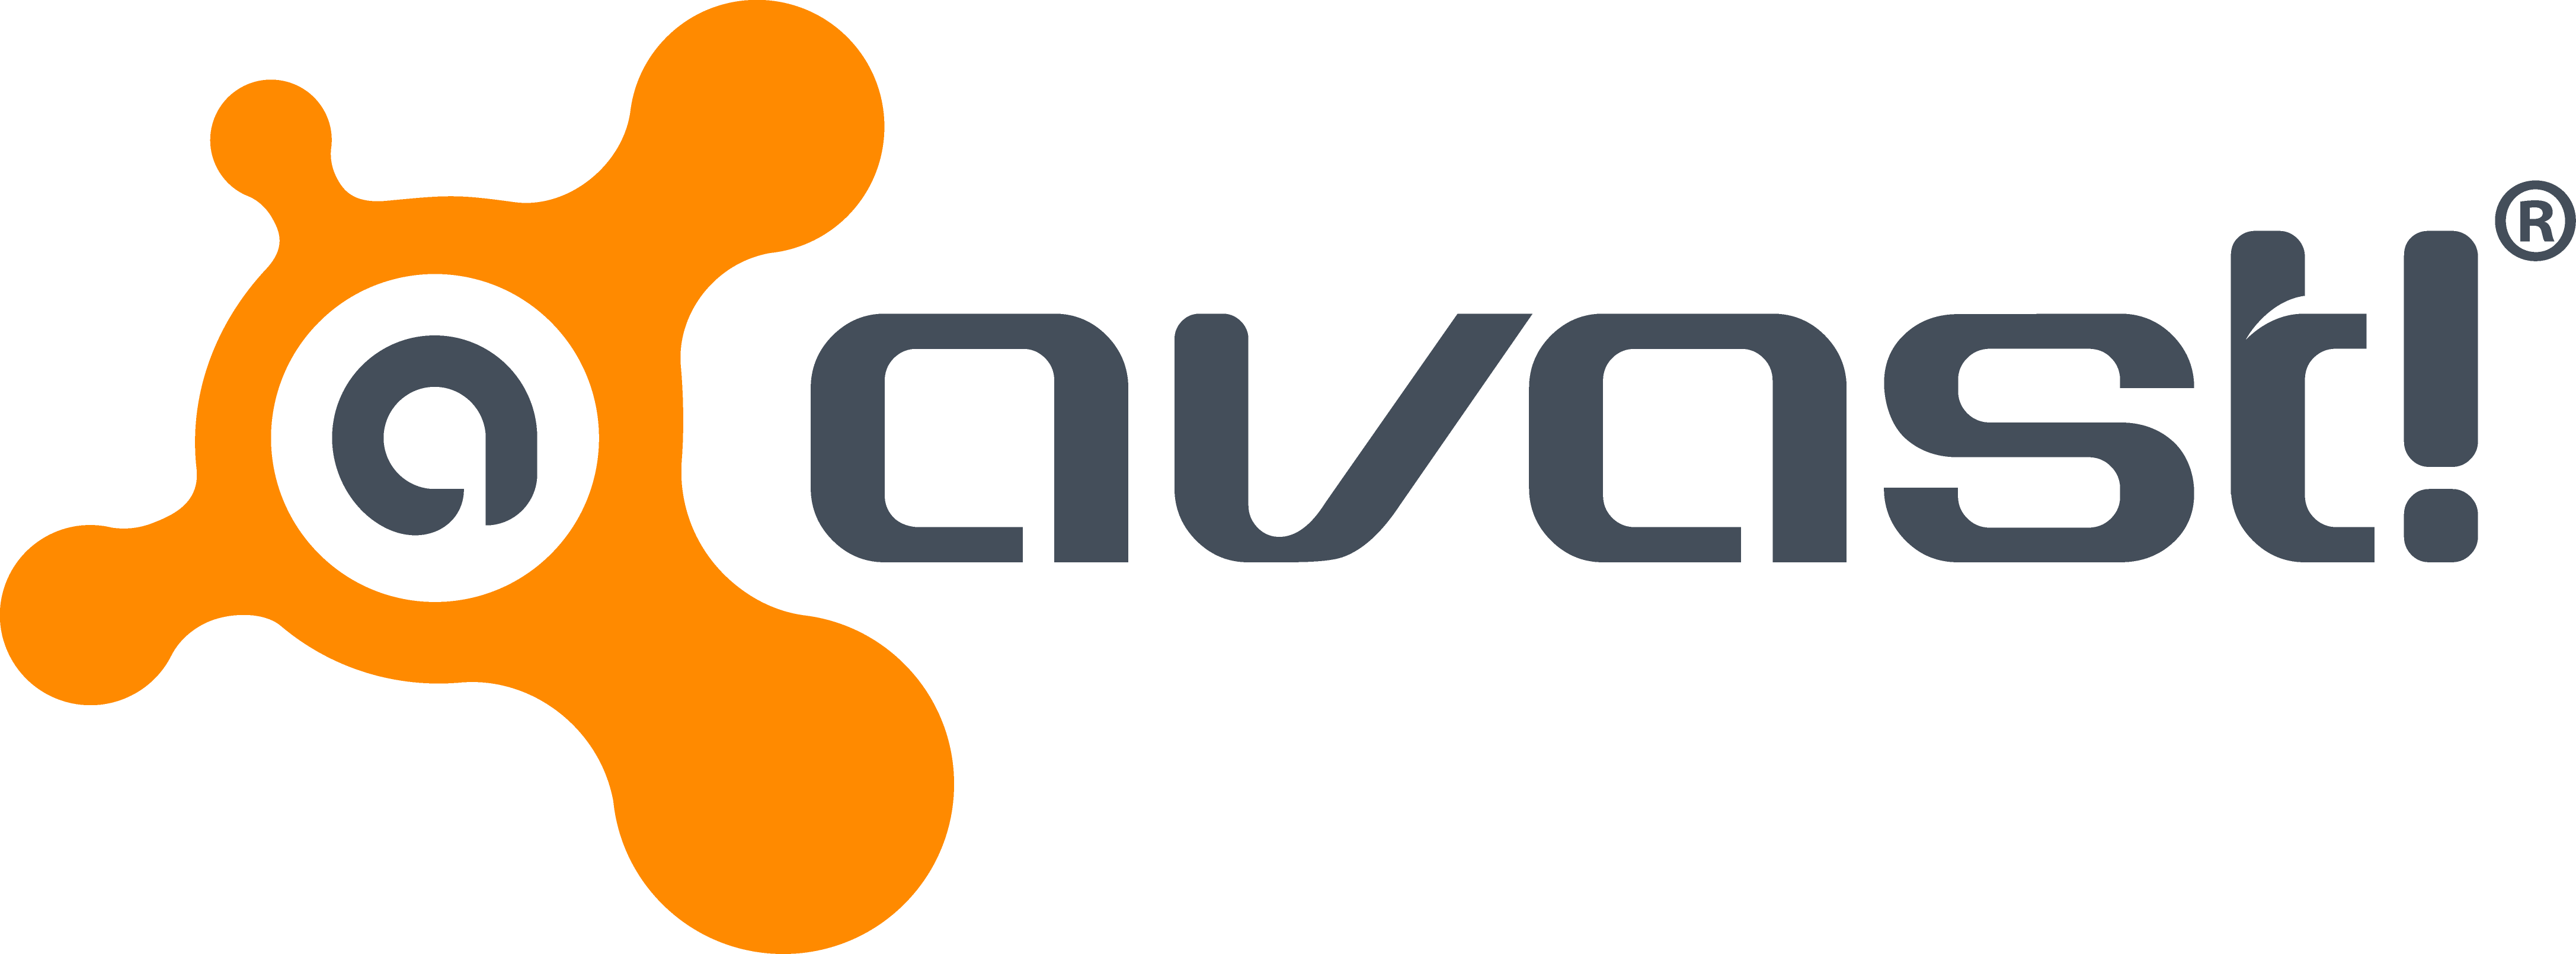 avast company overview